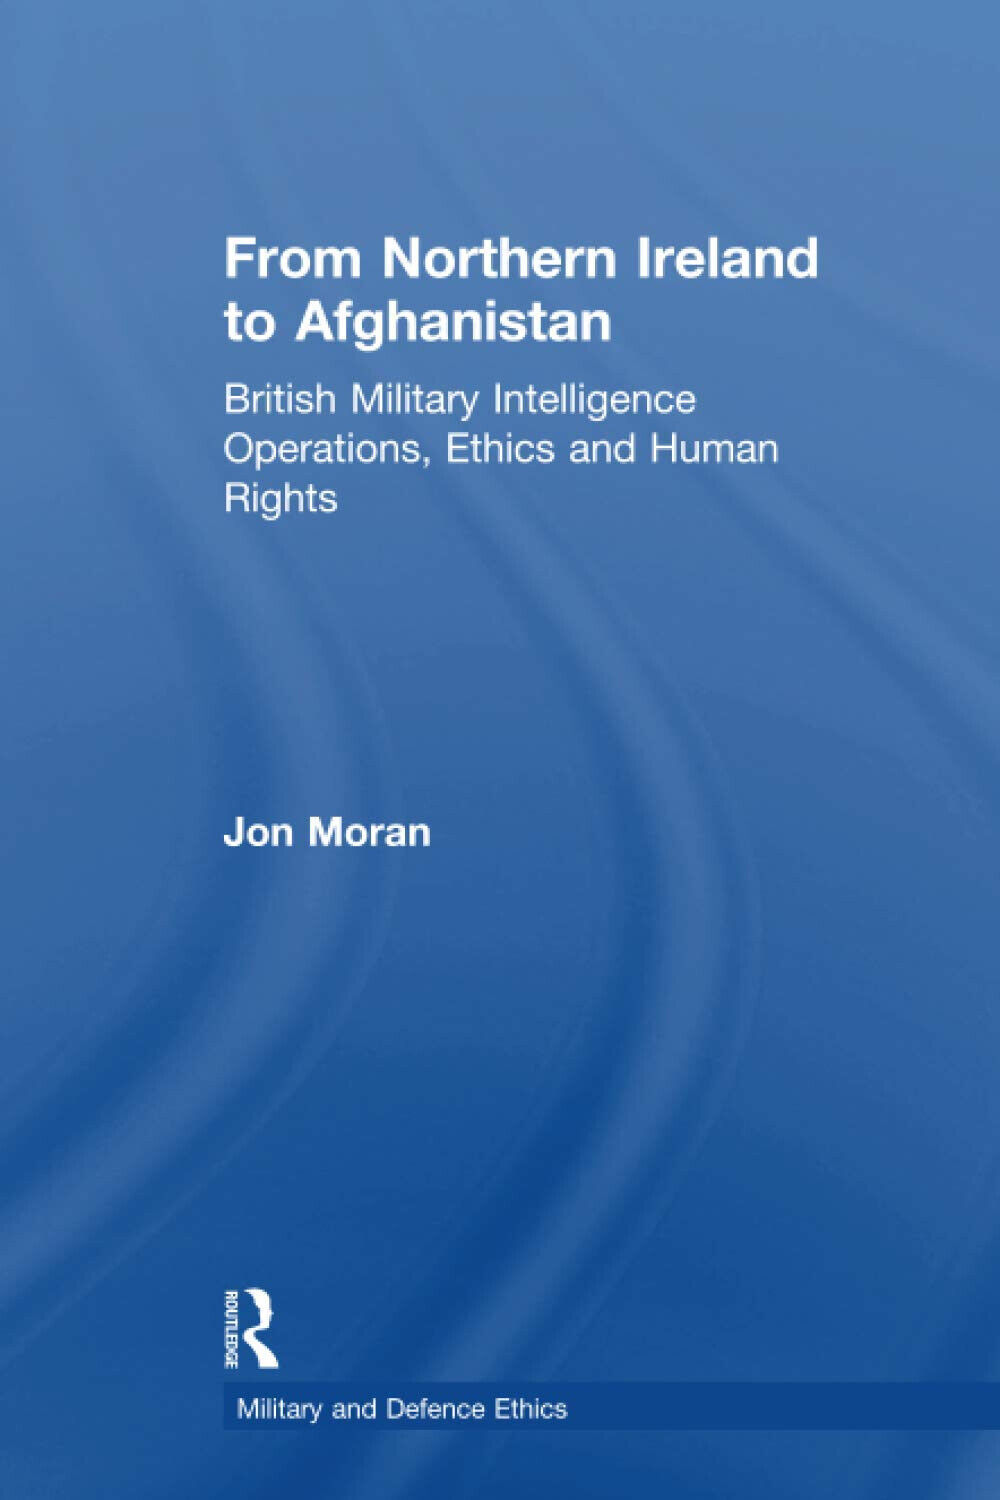 From Northern Ireland to Afghanistan - Jon Moran - Routledge, 2017 libro usato